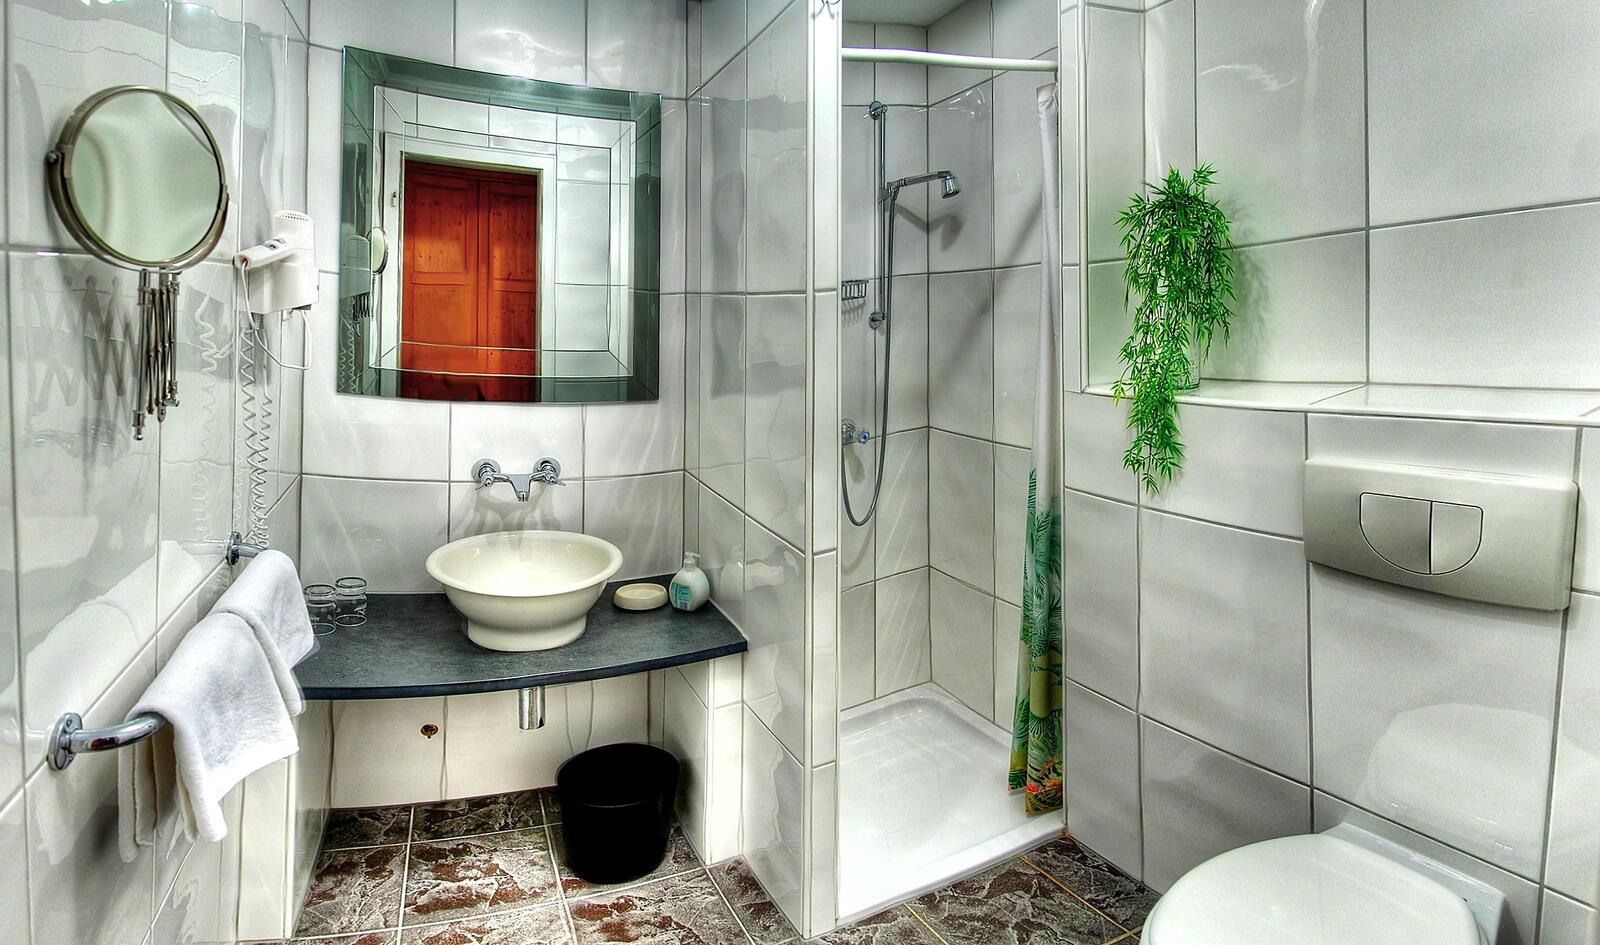 Free photo Bathroom interior with white tiles on the walls